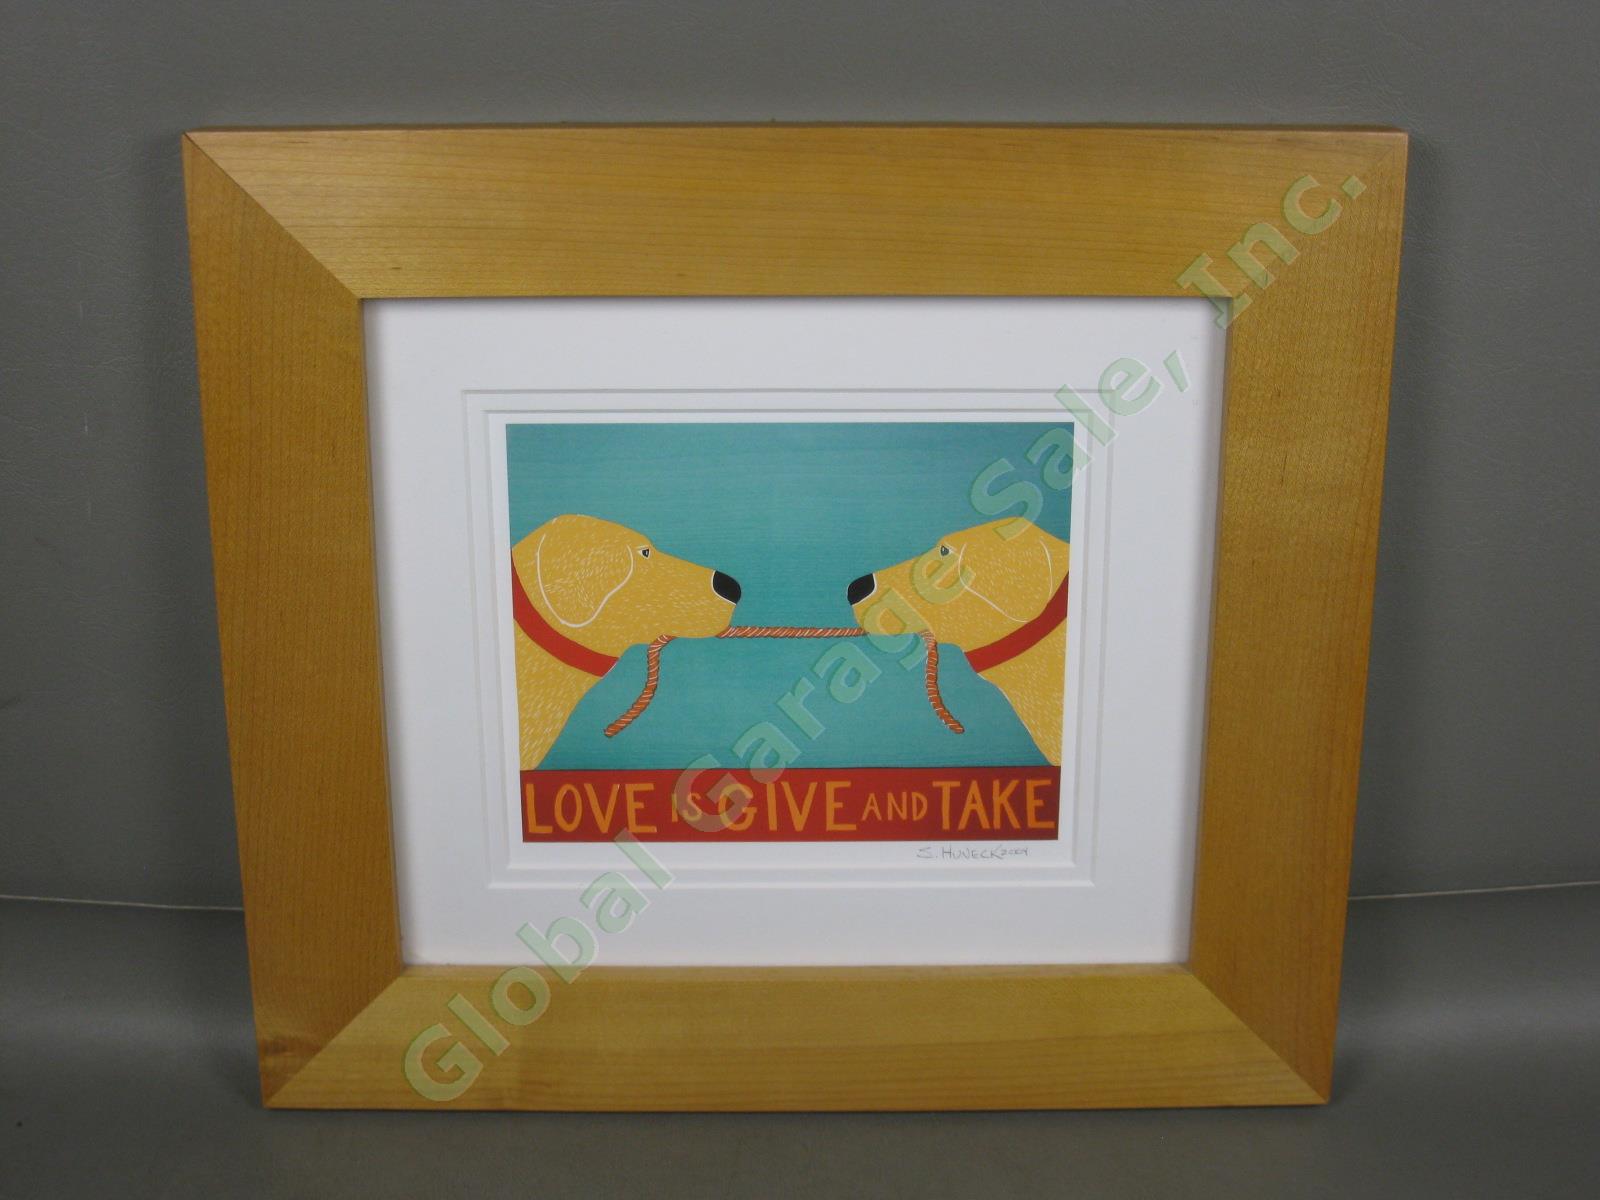 2004 Vermont Artist Stephen Huneck Signed Framed Dog Print Love Is Give And Take